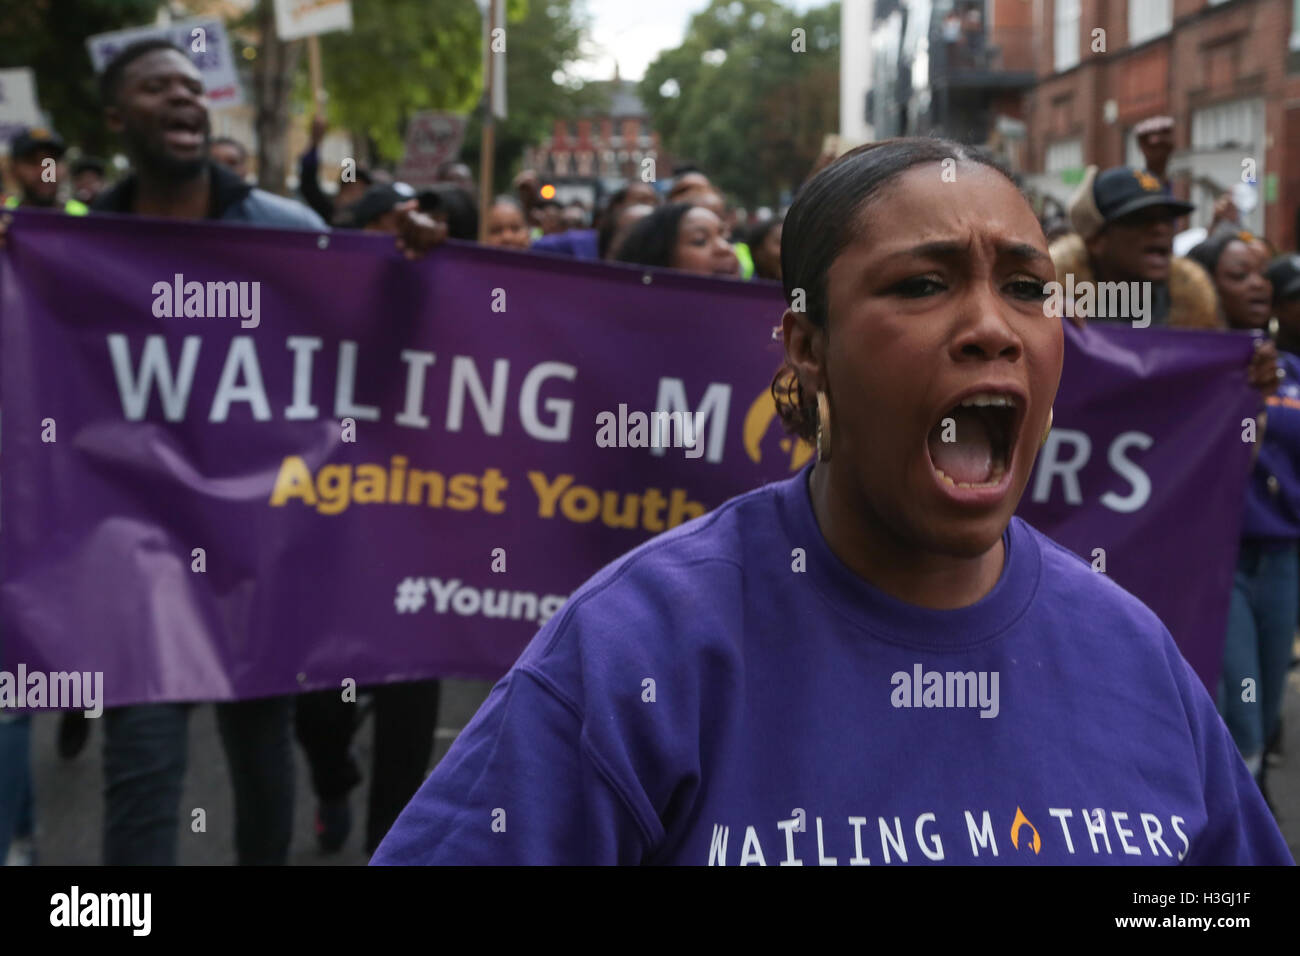 London, UK. 8th Oct, 2016. Wailing Mothers a campaign group to empower mothers and families in understanding the nature of youth violence marched from Brixton to Tulse hill denouncing knife and Gun crime. Credit:  Thabo Jaiyesimi/Alamy Live News Stock Photo